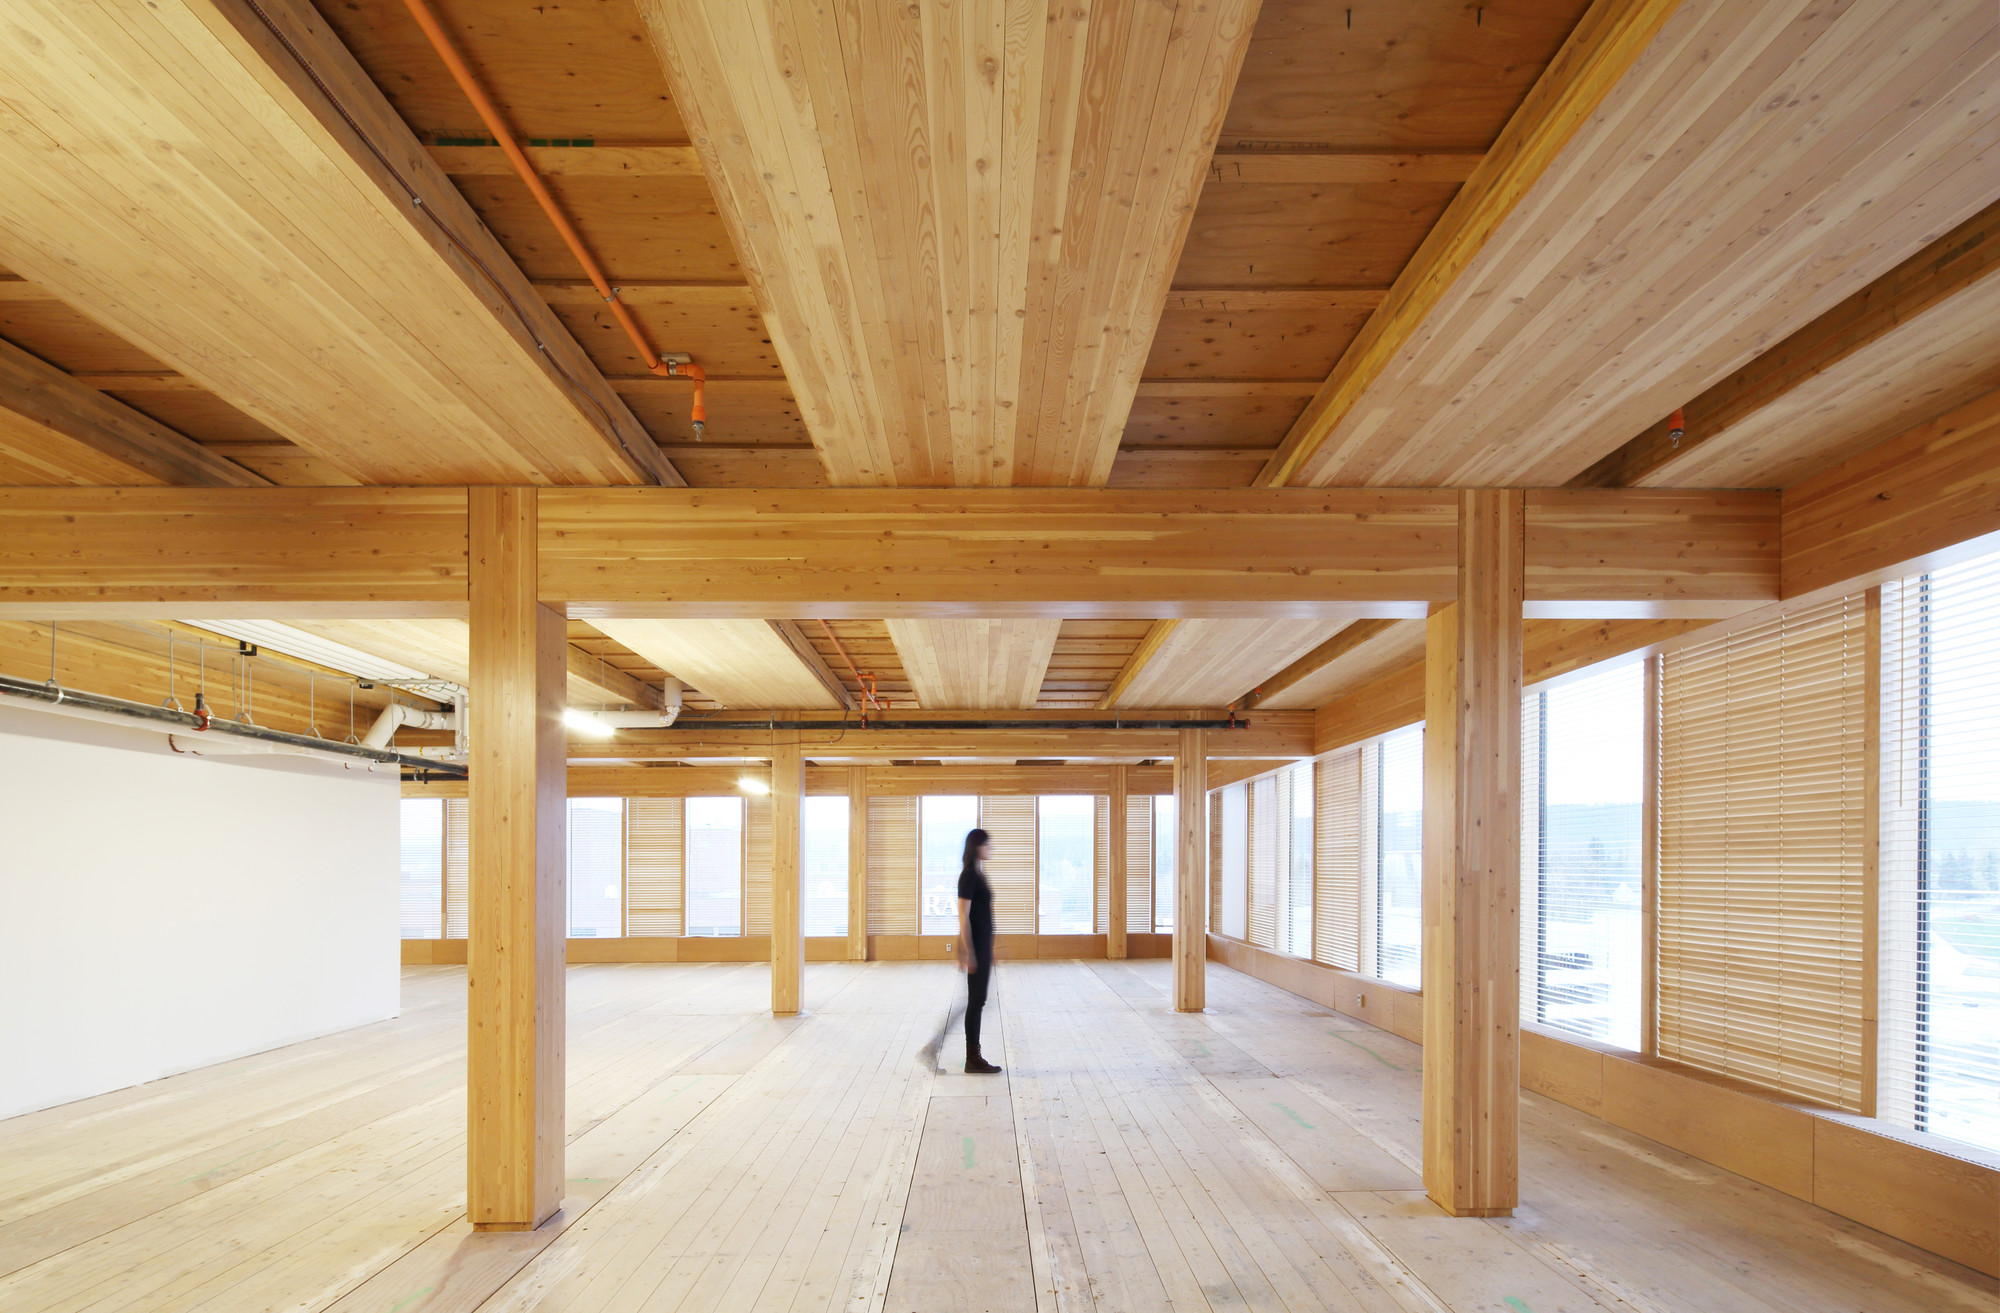 Excerpt from Estate Review: Cross-laminated Timber to an American Context" by Ian - Harvard Graduate School of Design